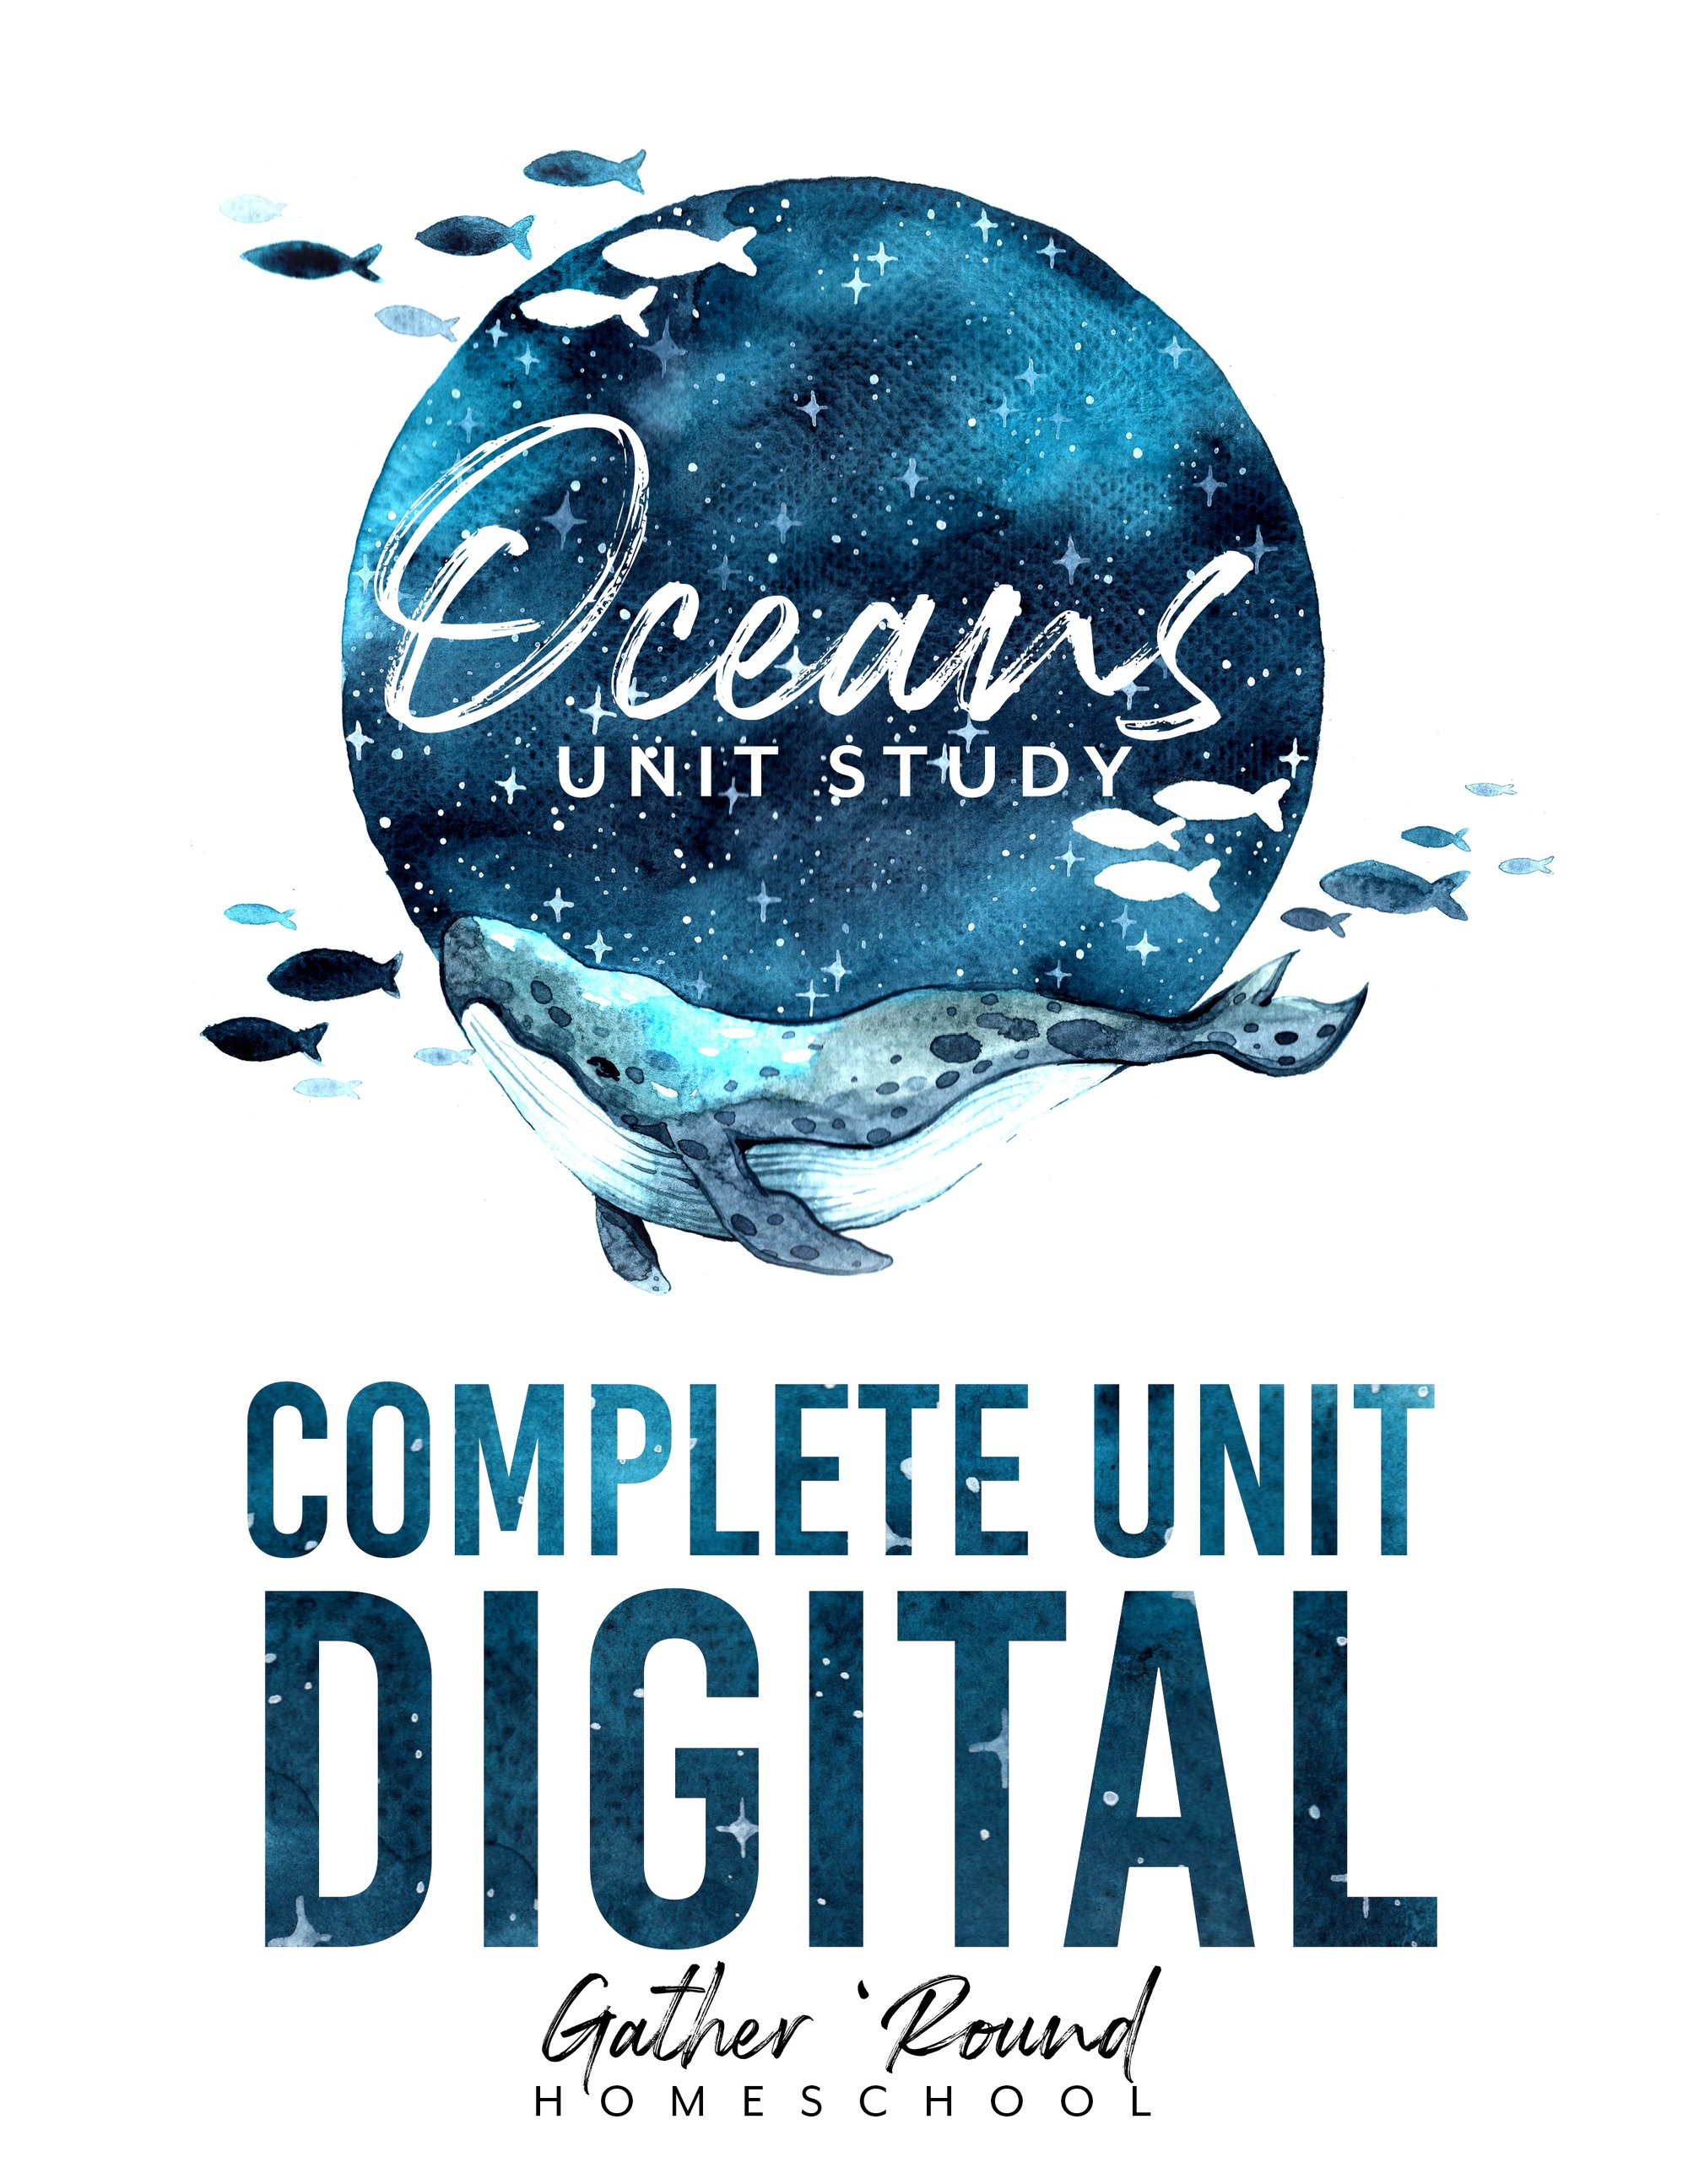 Oceans Unit Study from Gather ‘Round Homeschool